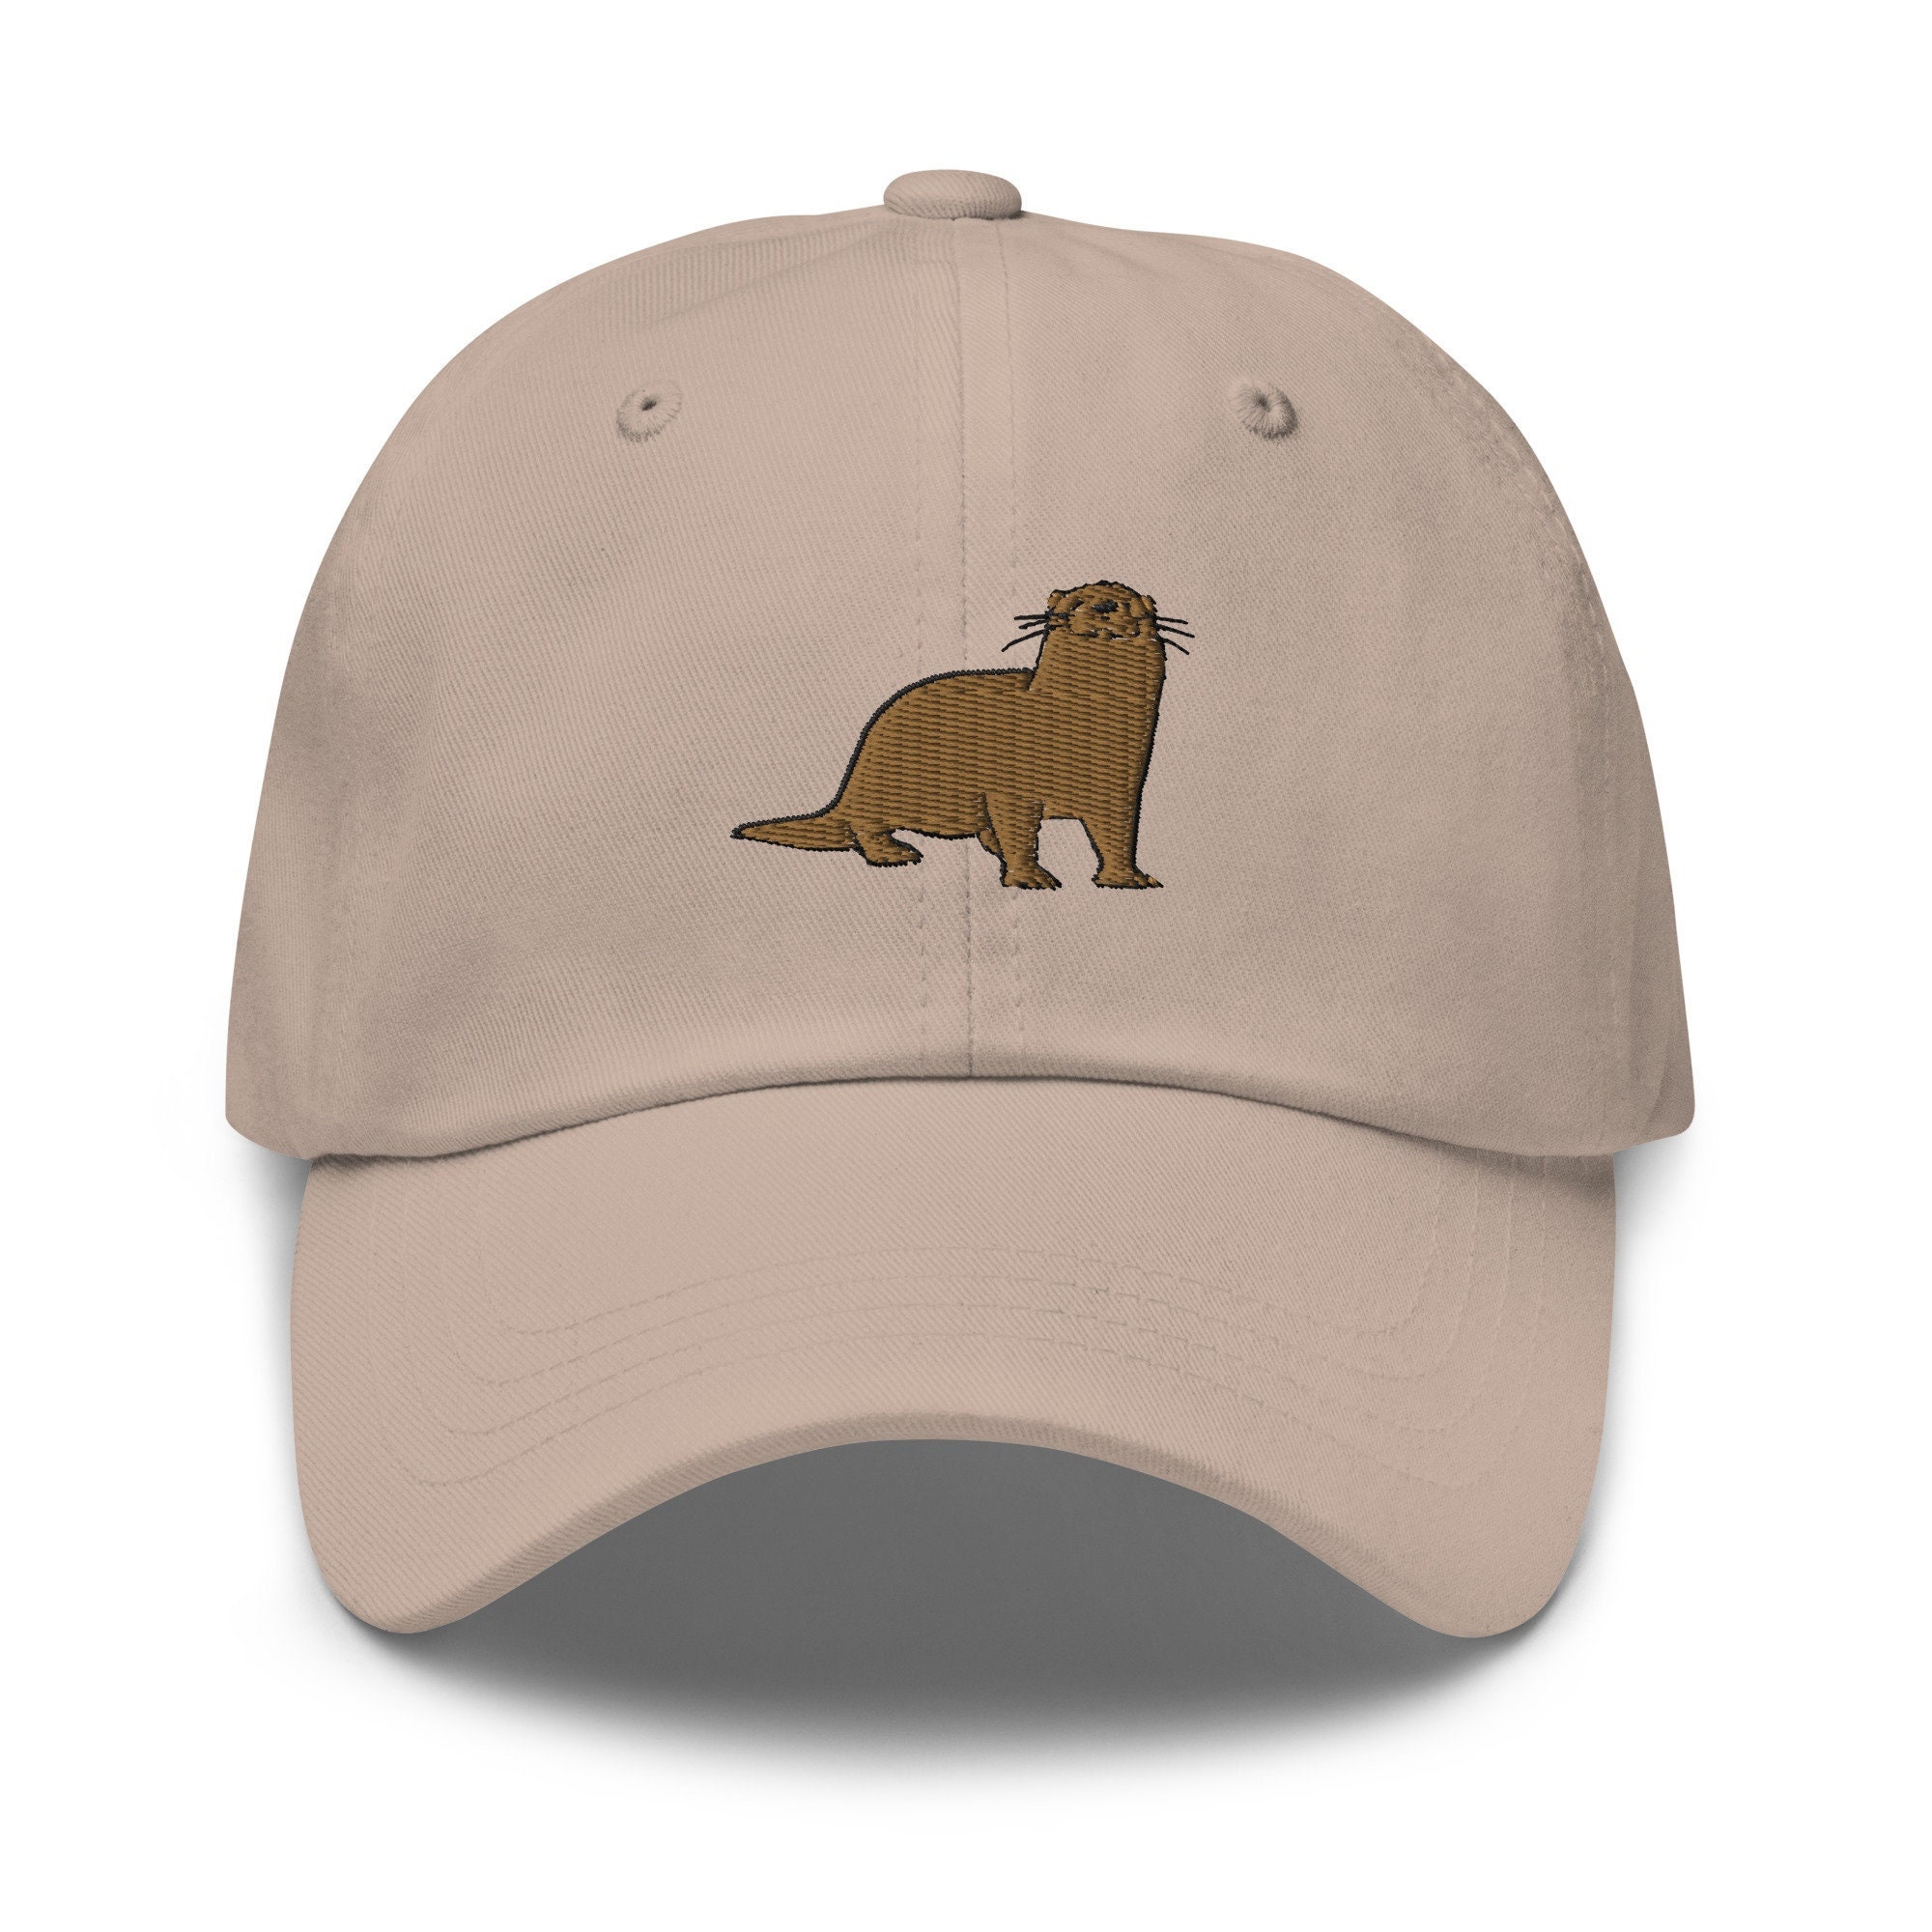 Otter Dad Hat, Otter Lovers Gifts, Wildlife Cap, Embroidered Unisex Hat,  Handmade Dad Cap, Adjustable Baseball Cap Gift Multiple Colors 